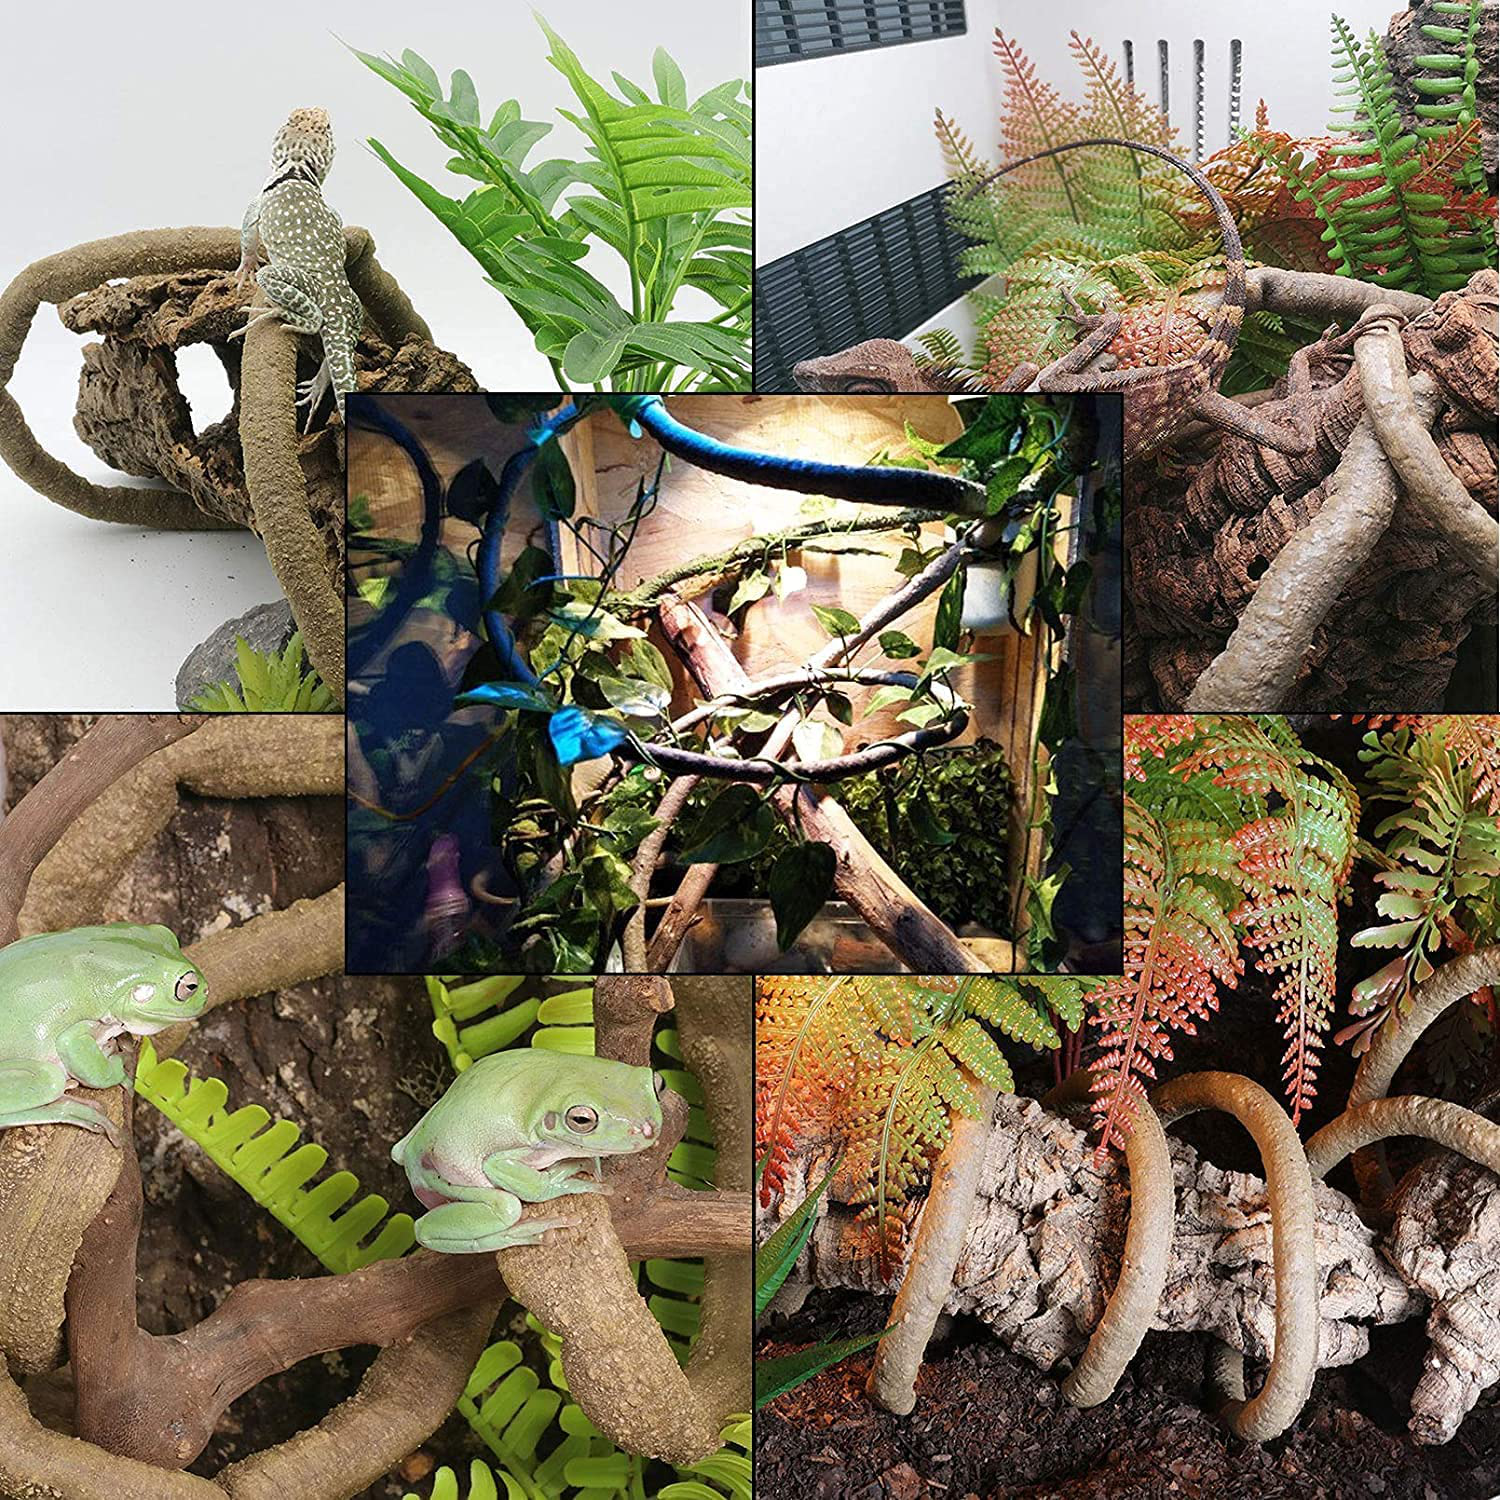 Hamiledyi Reptile Coconut Shell Hideout 5 Pack Lizard Coco Hut Durable Cave Habitat Jungle Climber Vines Flexible Plants Gecko Tank Accessories Decor for Chameleons Spiders Snakes Climbing Toys